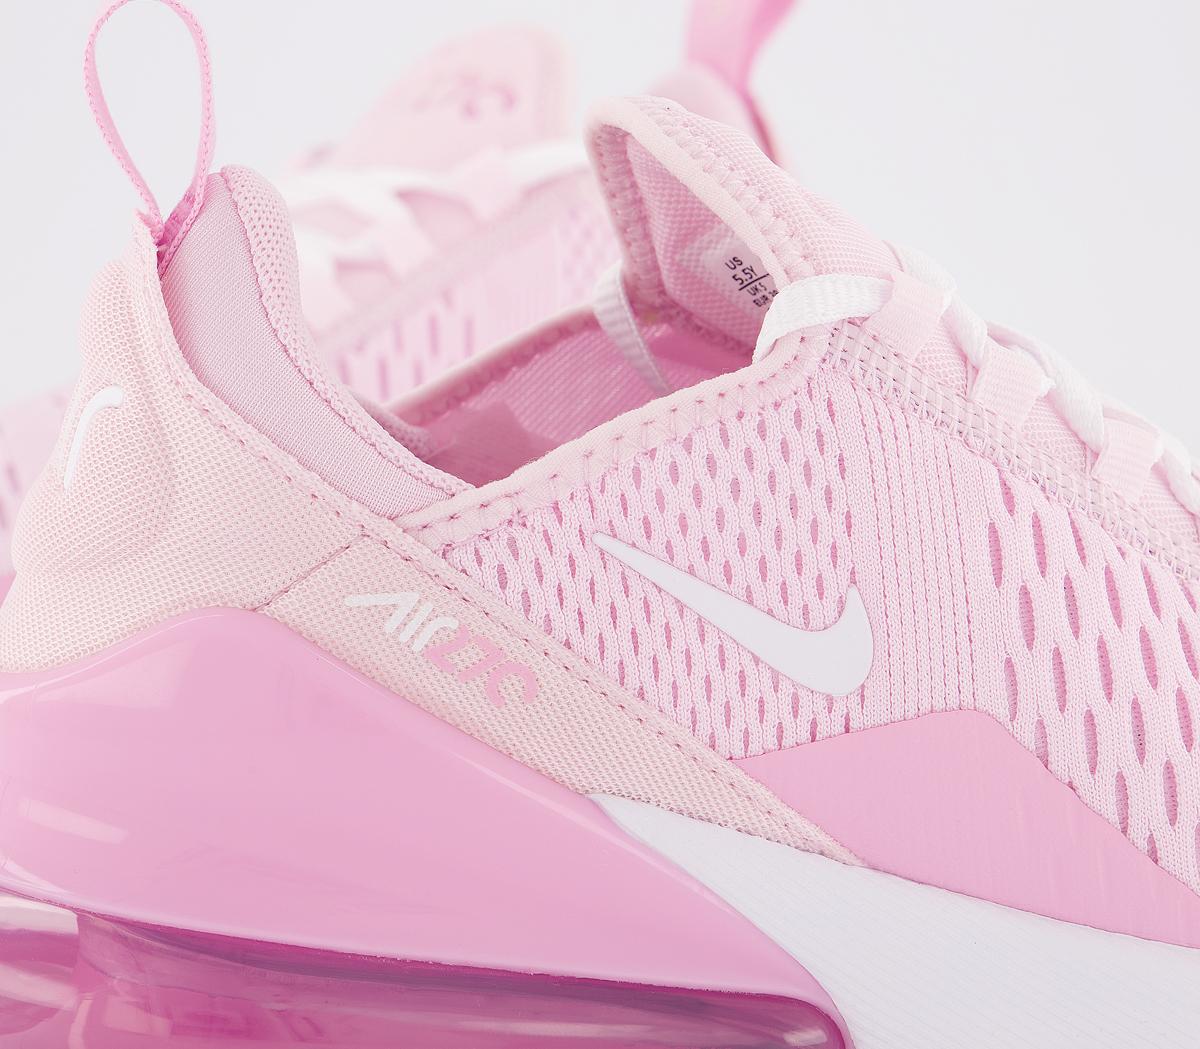 Nike Air Max 270 Gs Trainers Pink Foam White Pink Rise - Unisex